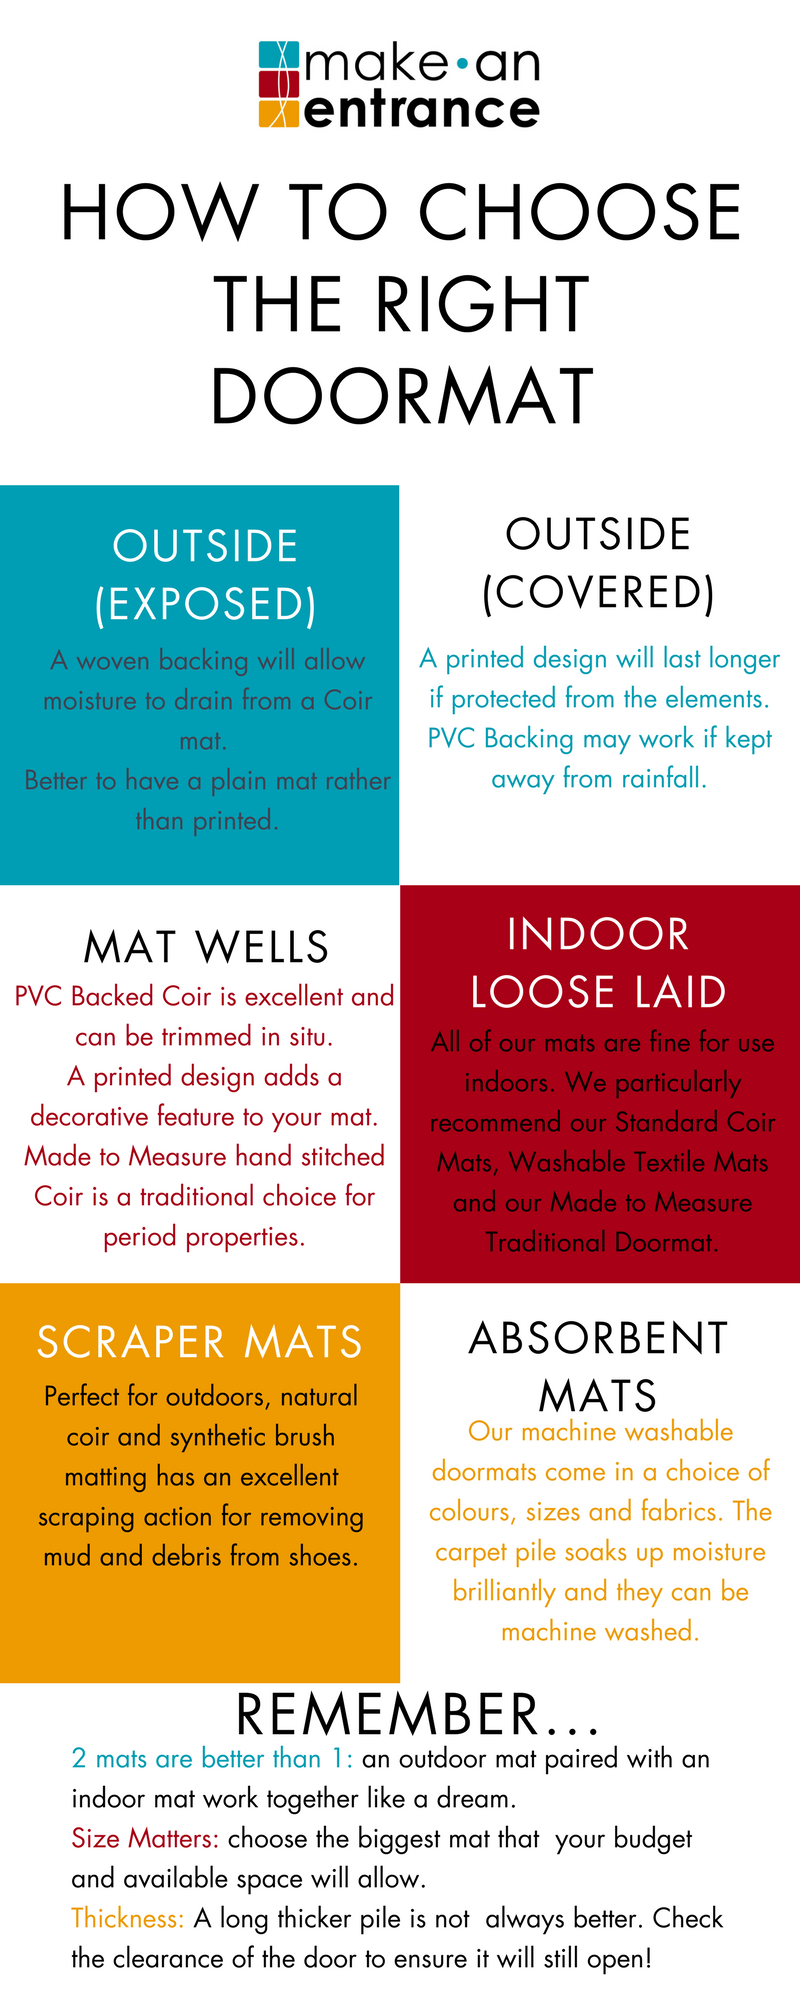 Infographic to help you choose the right doormat